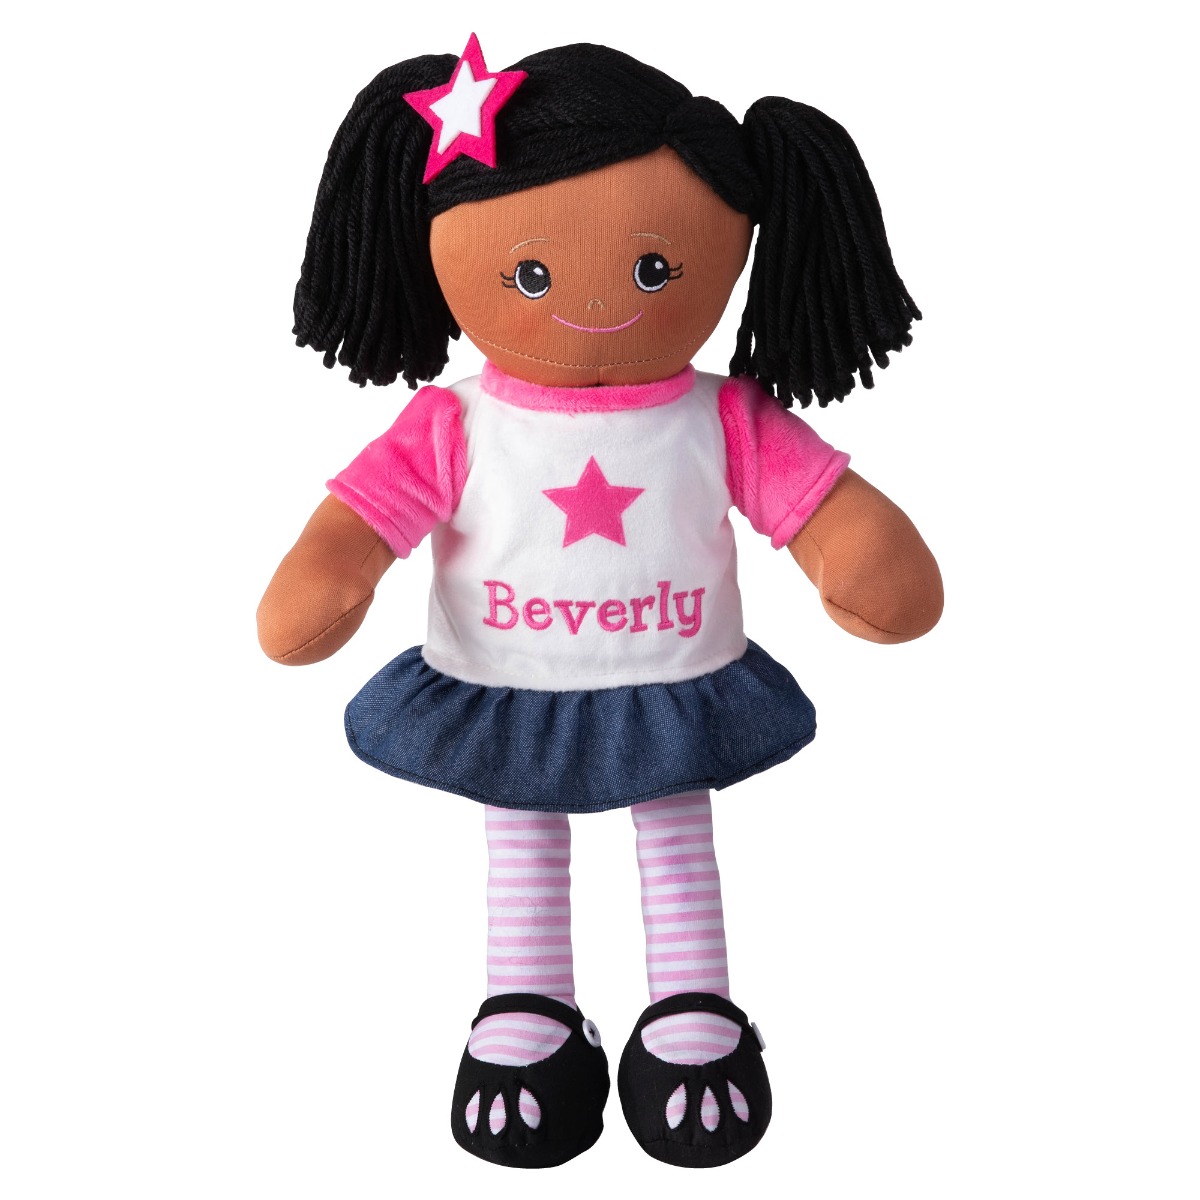 African American rag doll with name 